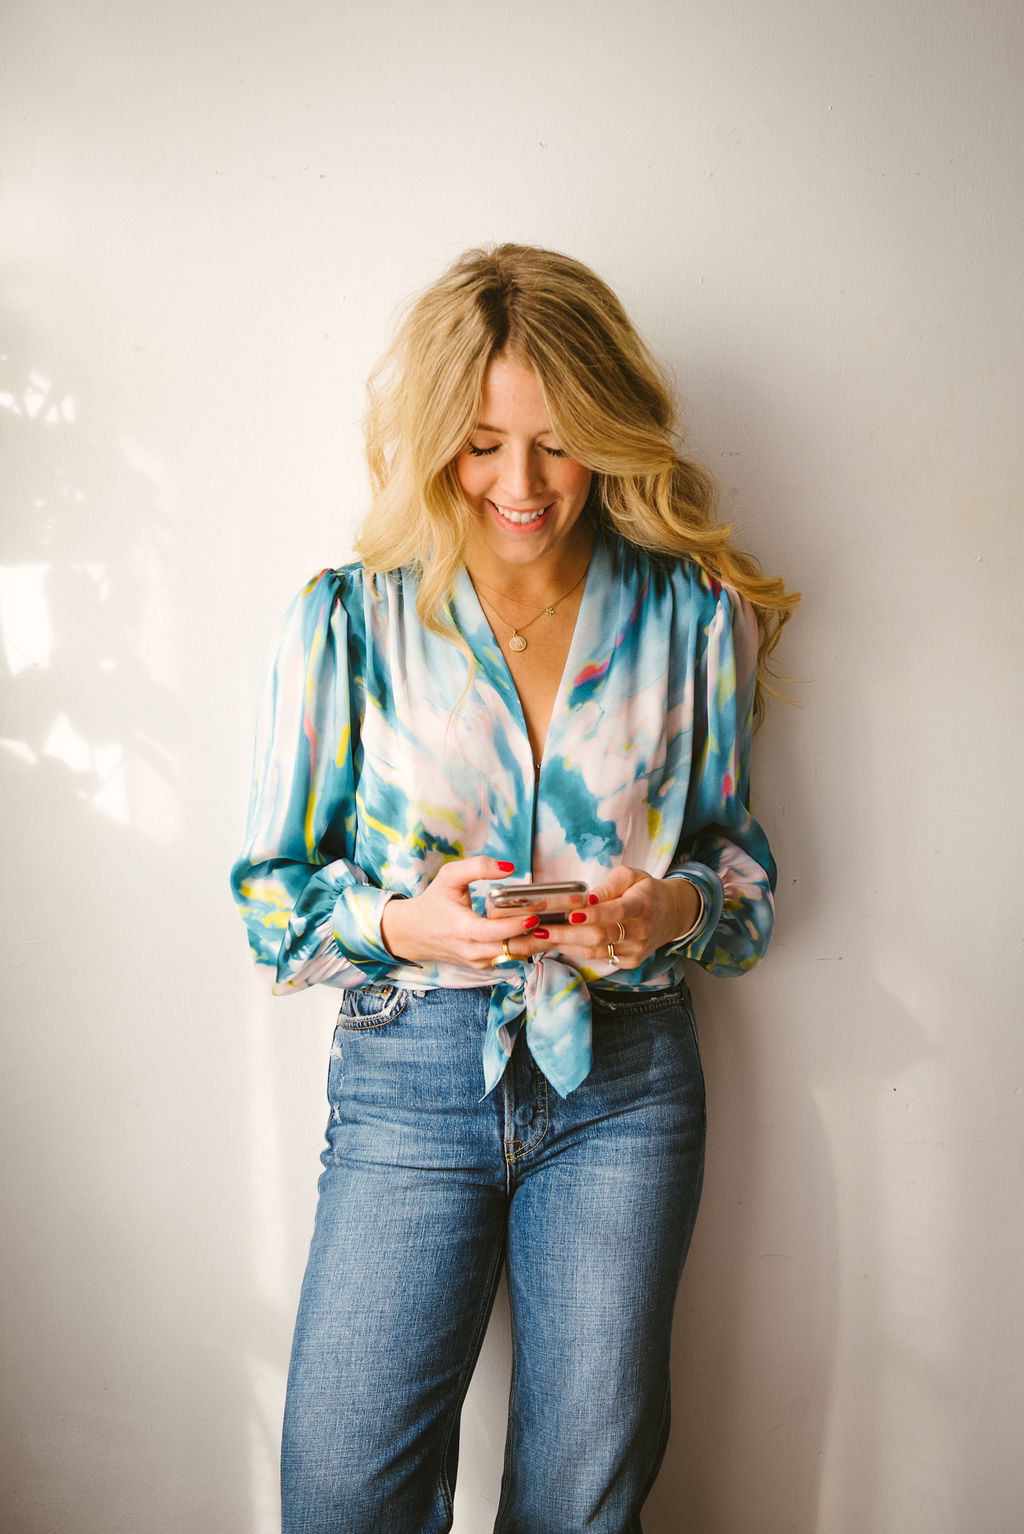 Toronto Stylist Julianne Costigan Launches an Online Style Guide